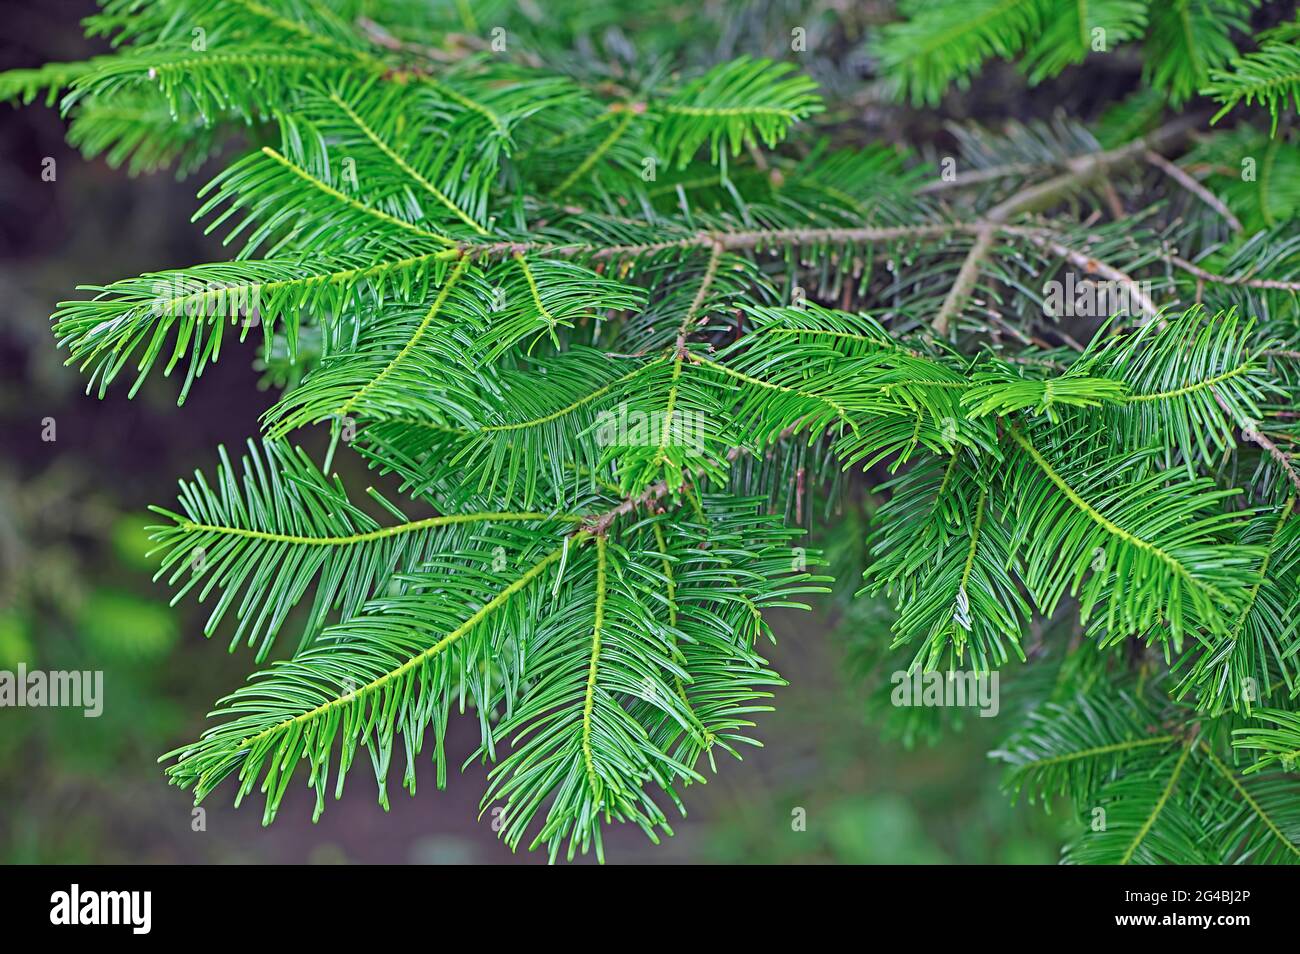 Grand Fir tree (Abies grandis) new growth showing bright green needles. Stock Photo